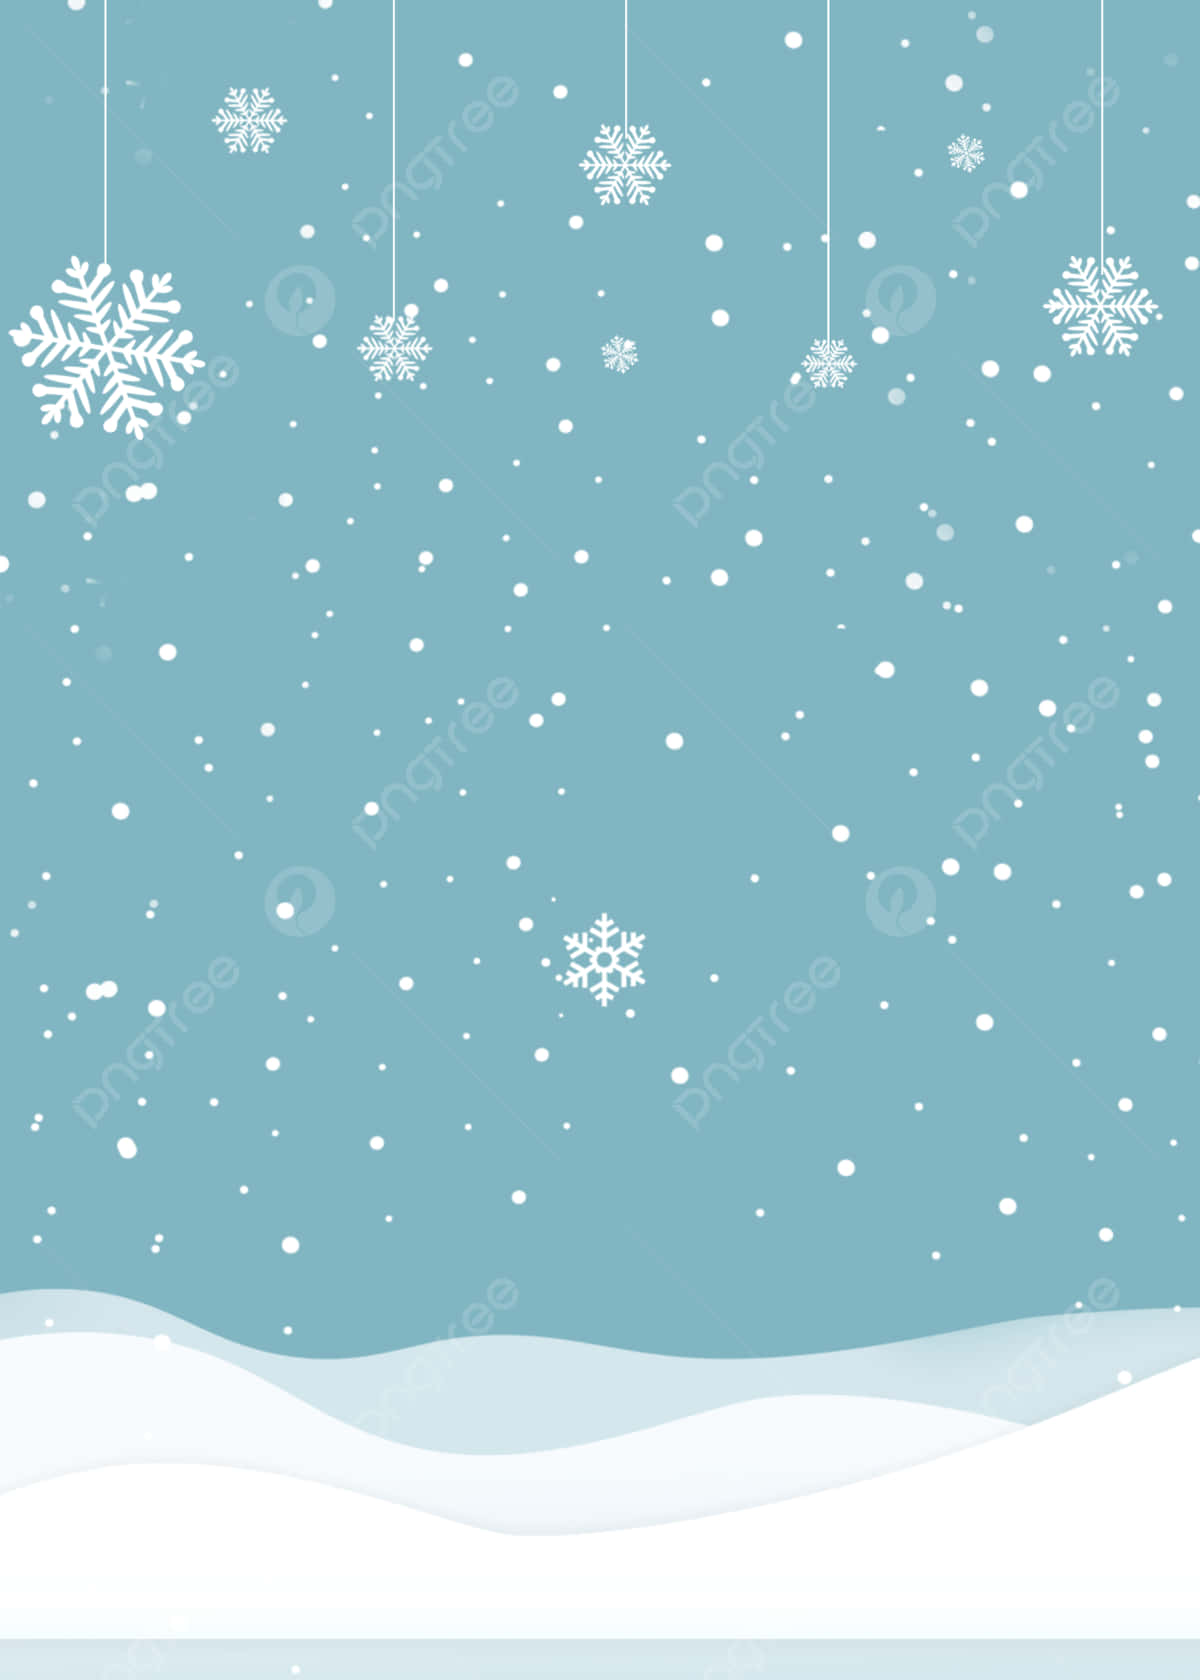 Snowflakes Falling From The Sky On A Blue Background Wallpaper